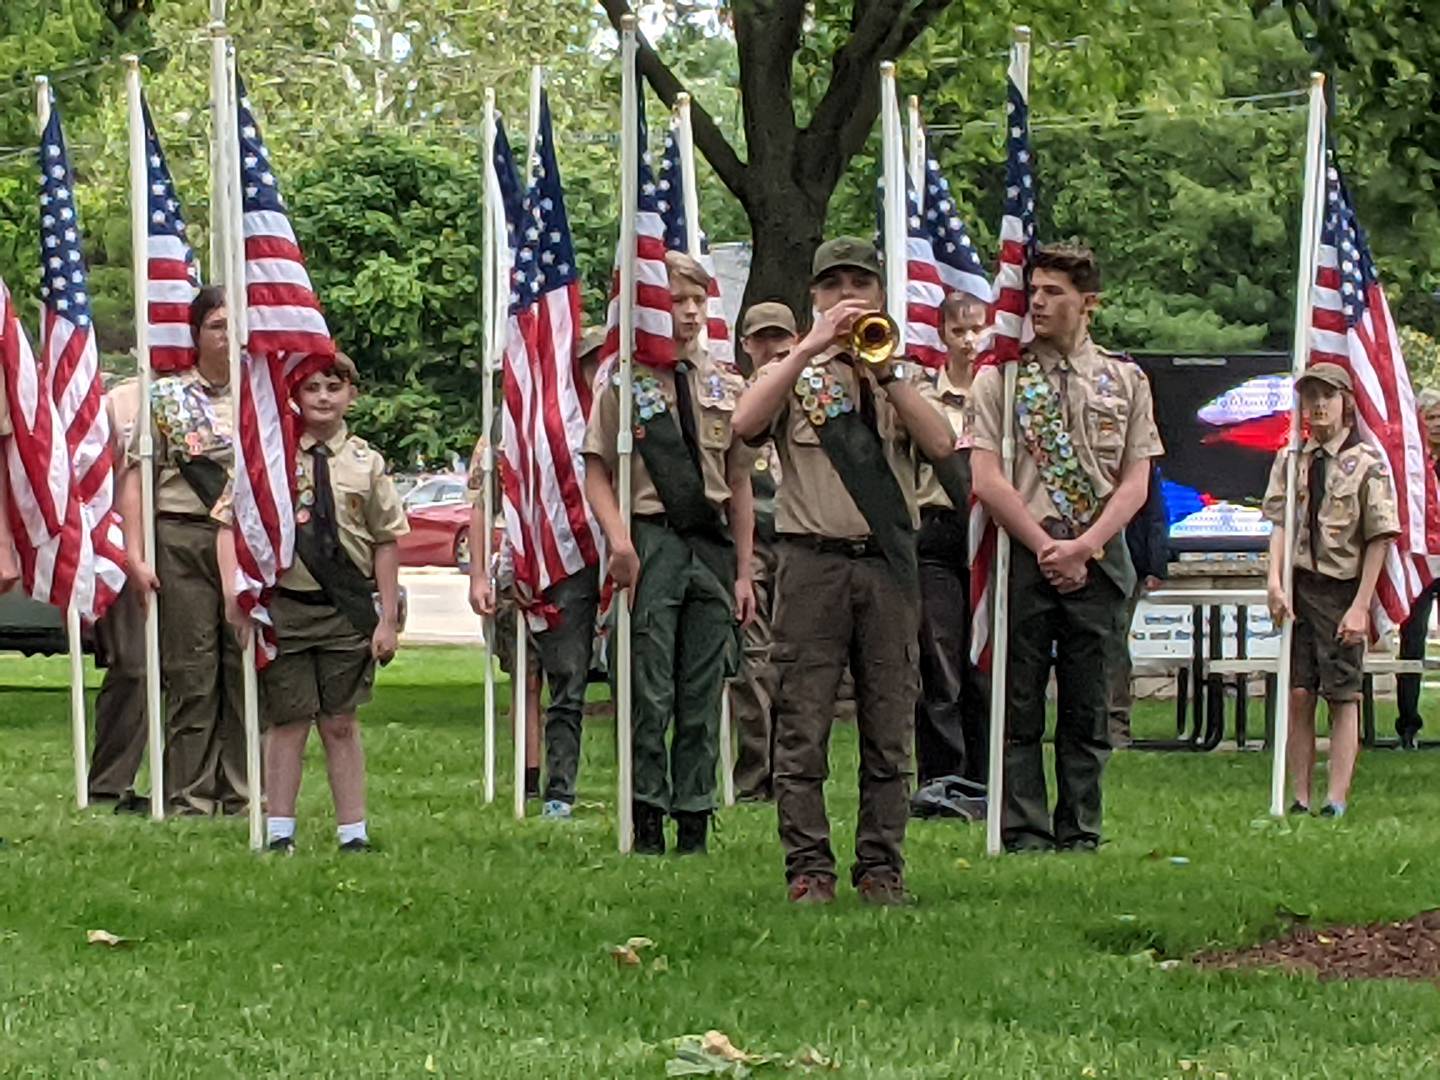 Yorkville Boy Scout Troop 40 participated in the Yorkville American Legion Memorial Day ceremony on May 27 in Town Square Park in Yorkville.